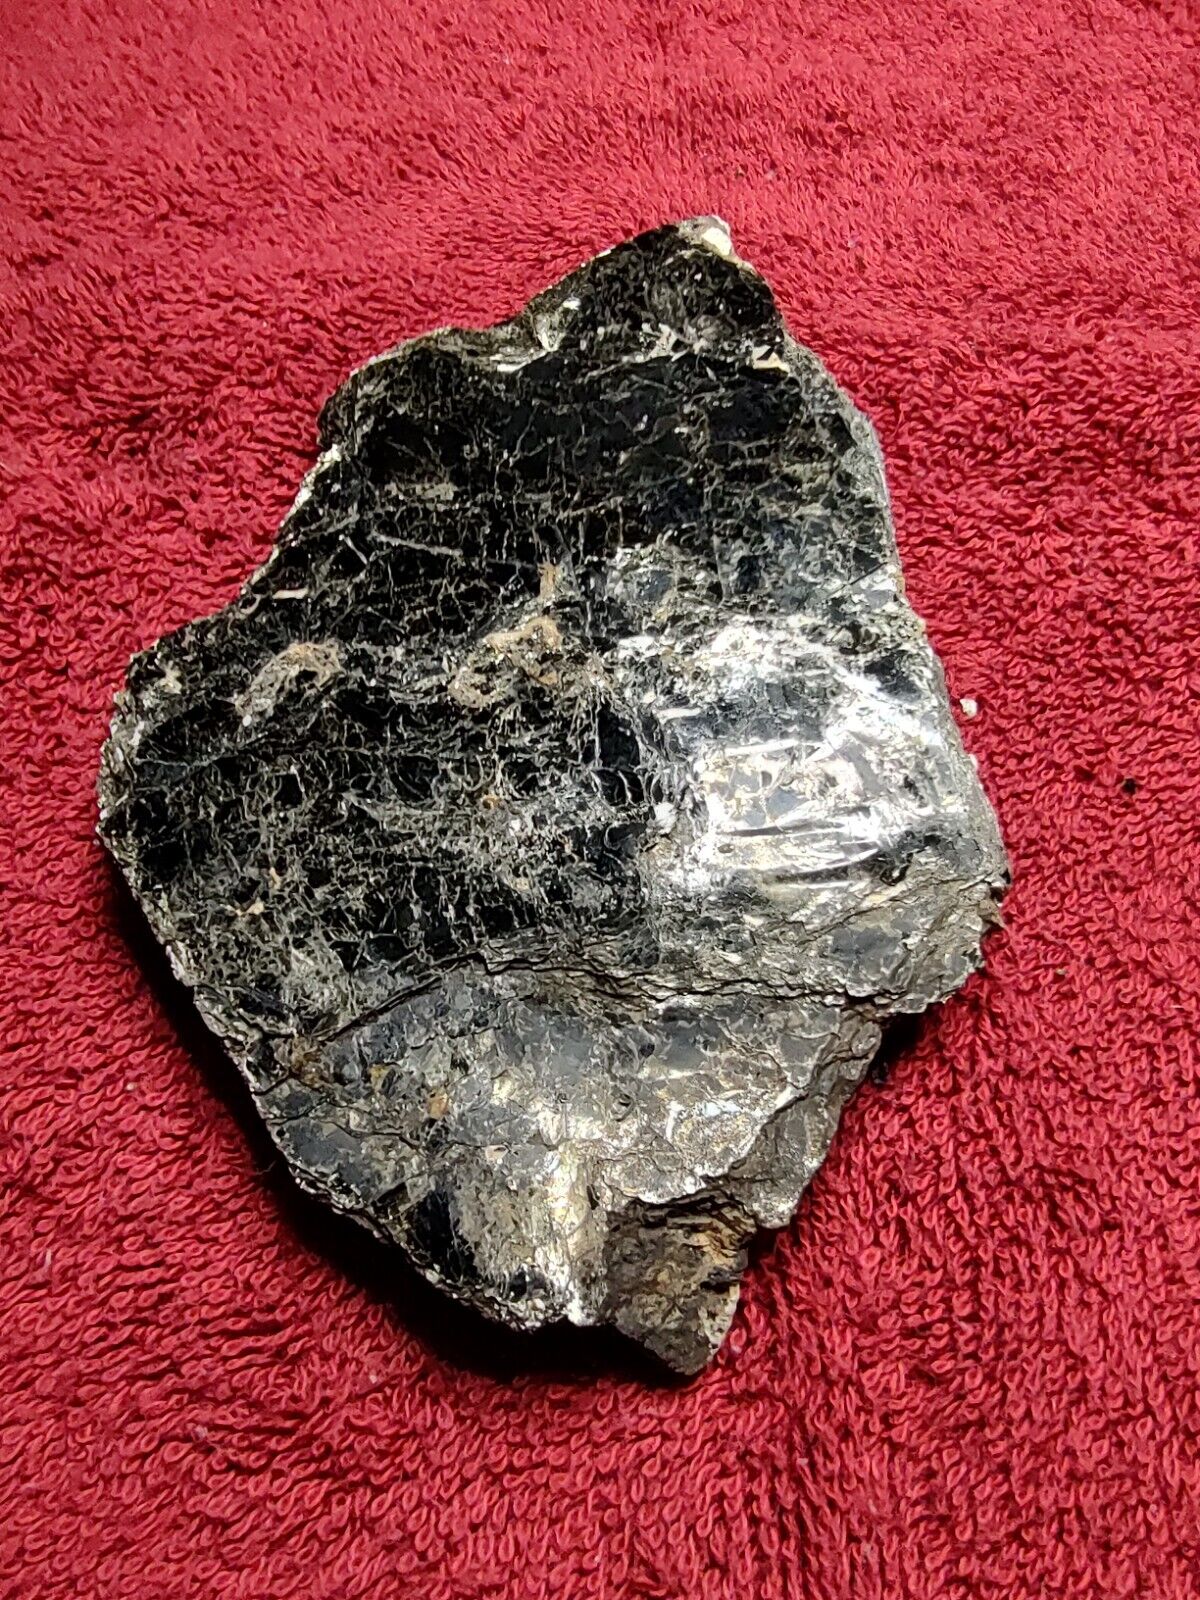 Large Biotite (Black) Mica Book - From Central Maine, USA.  